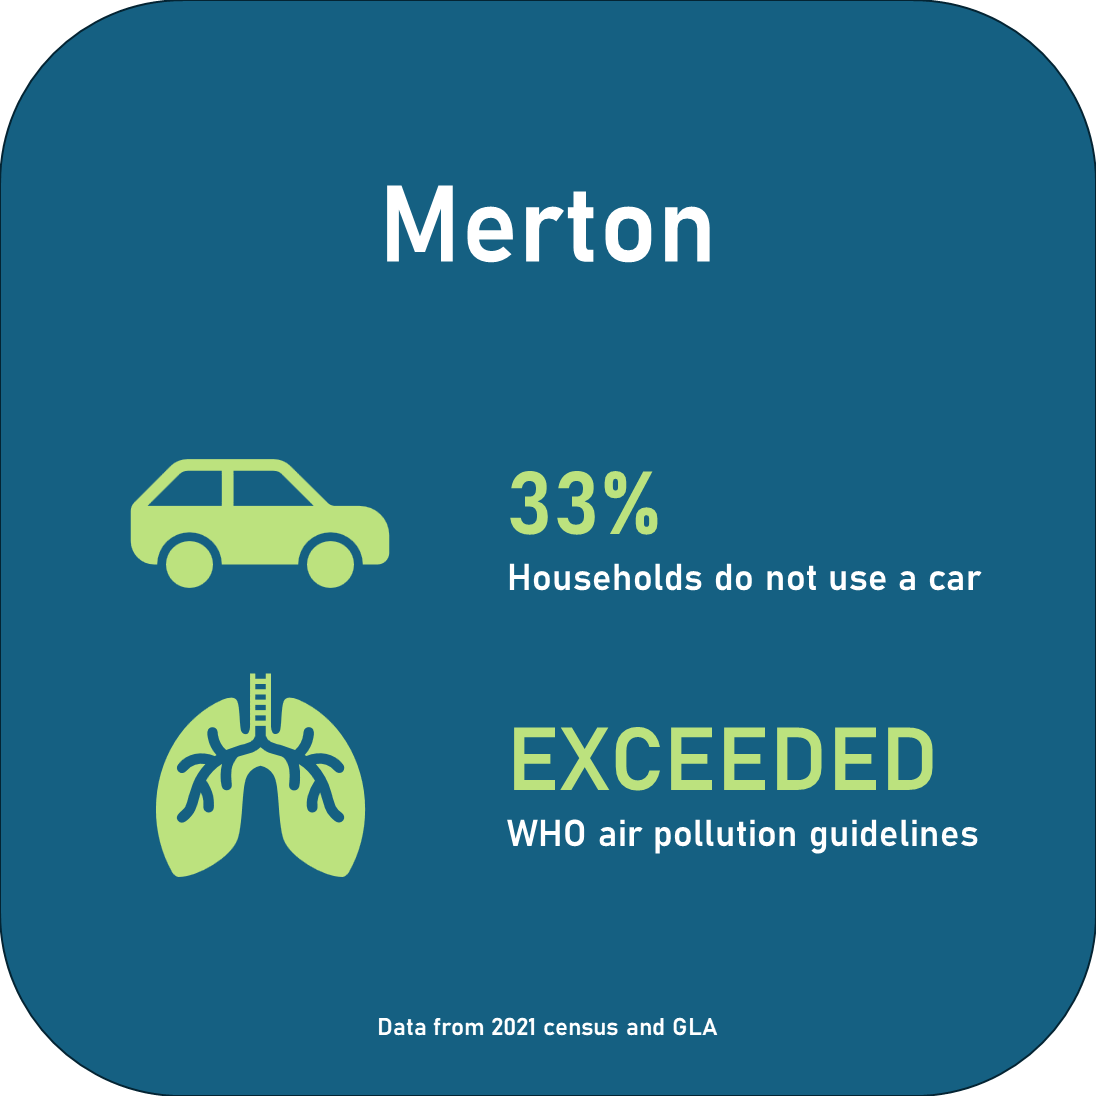 33% households do not use a car. Exceeded WHO air pollution guidelines.